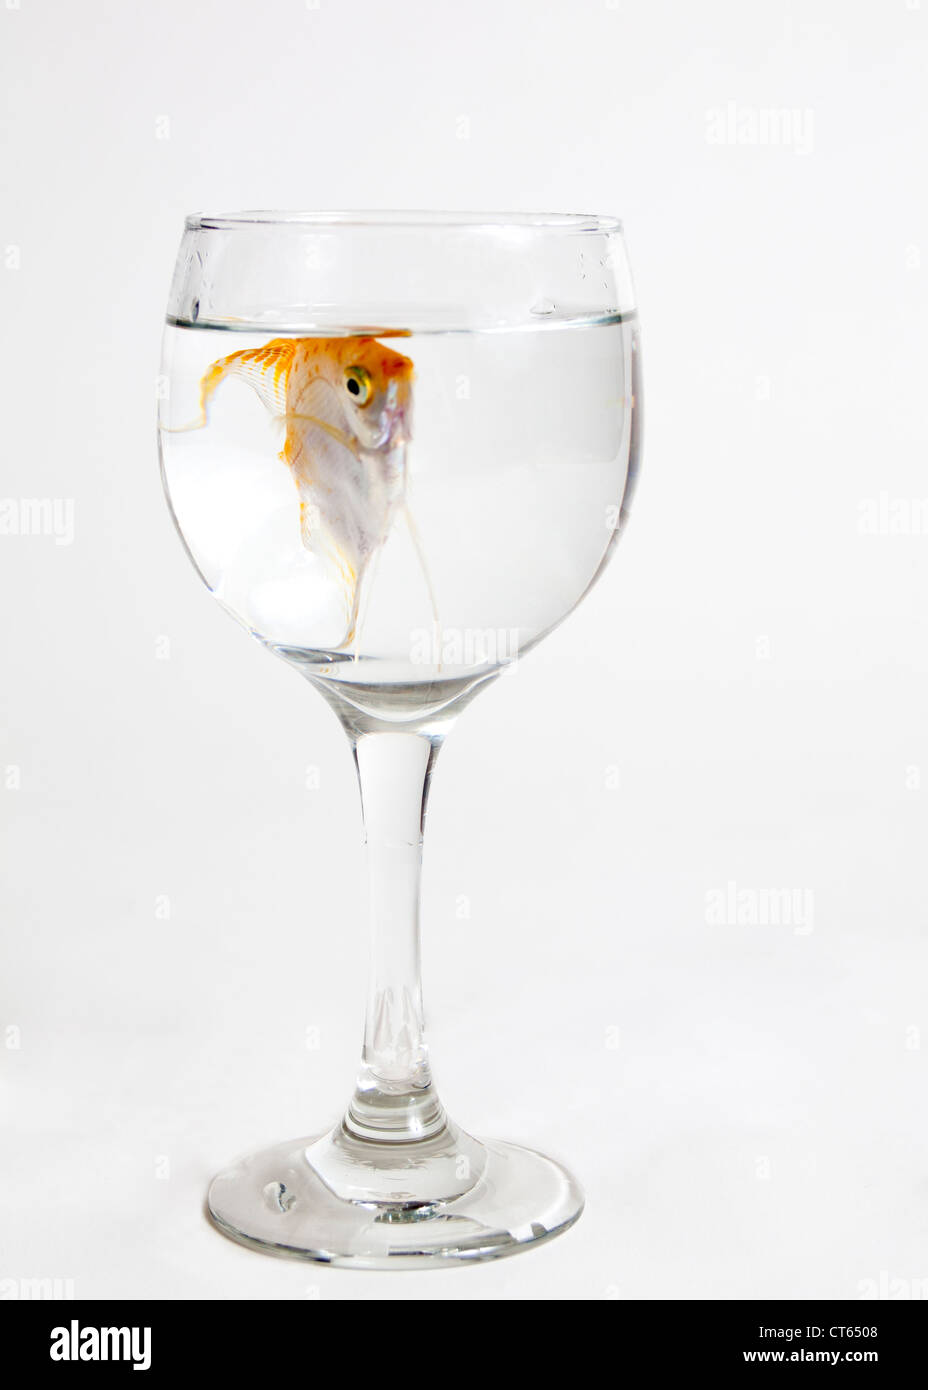 Angelfish (Pterophyllum scalare)  in a glass of water. Stock Photo